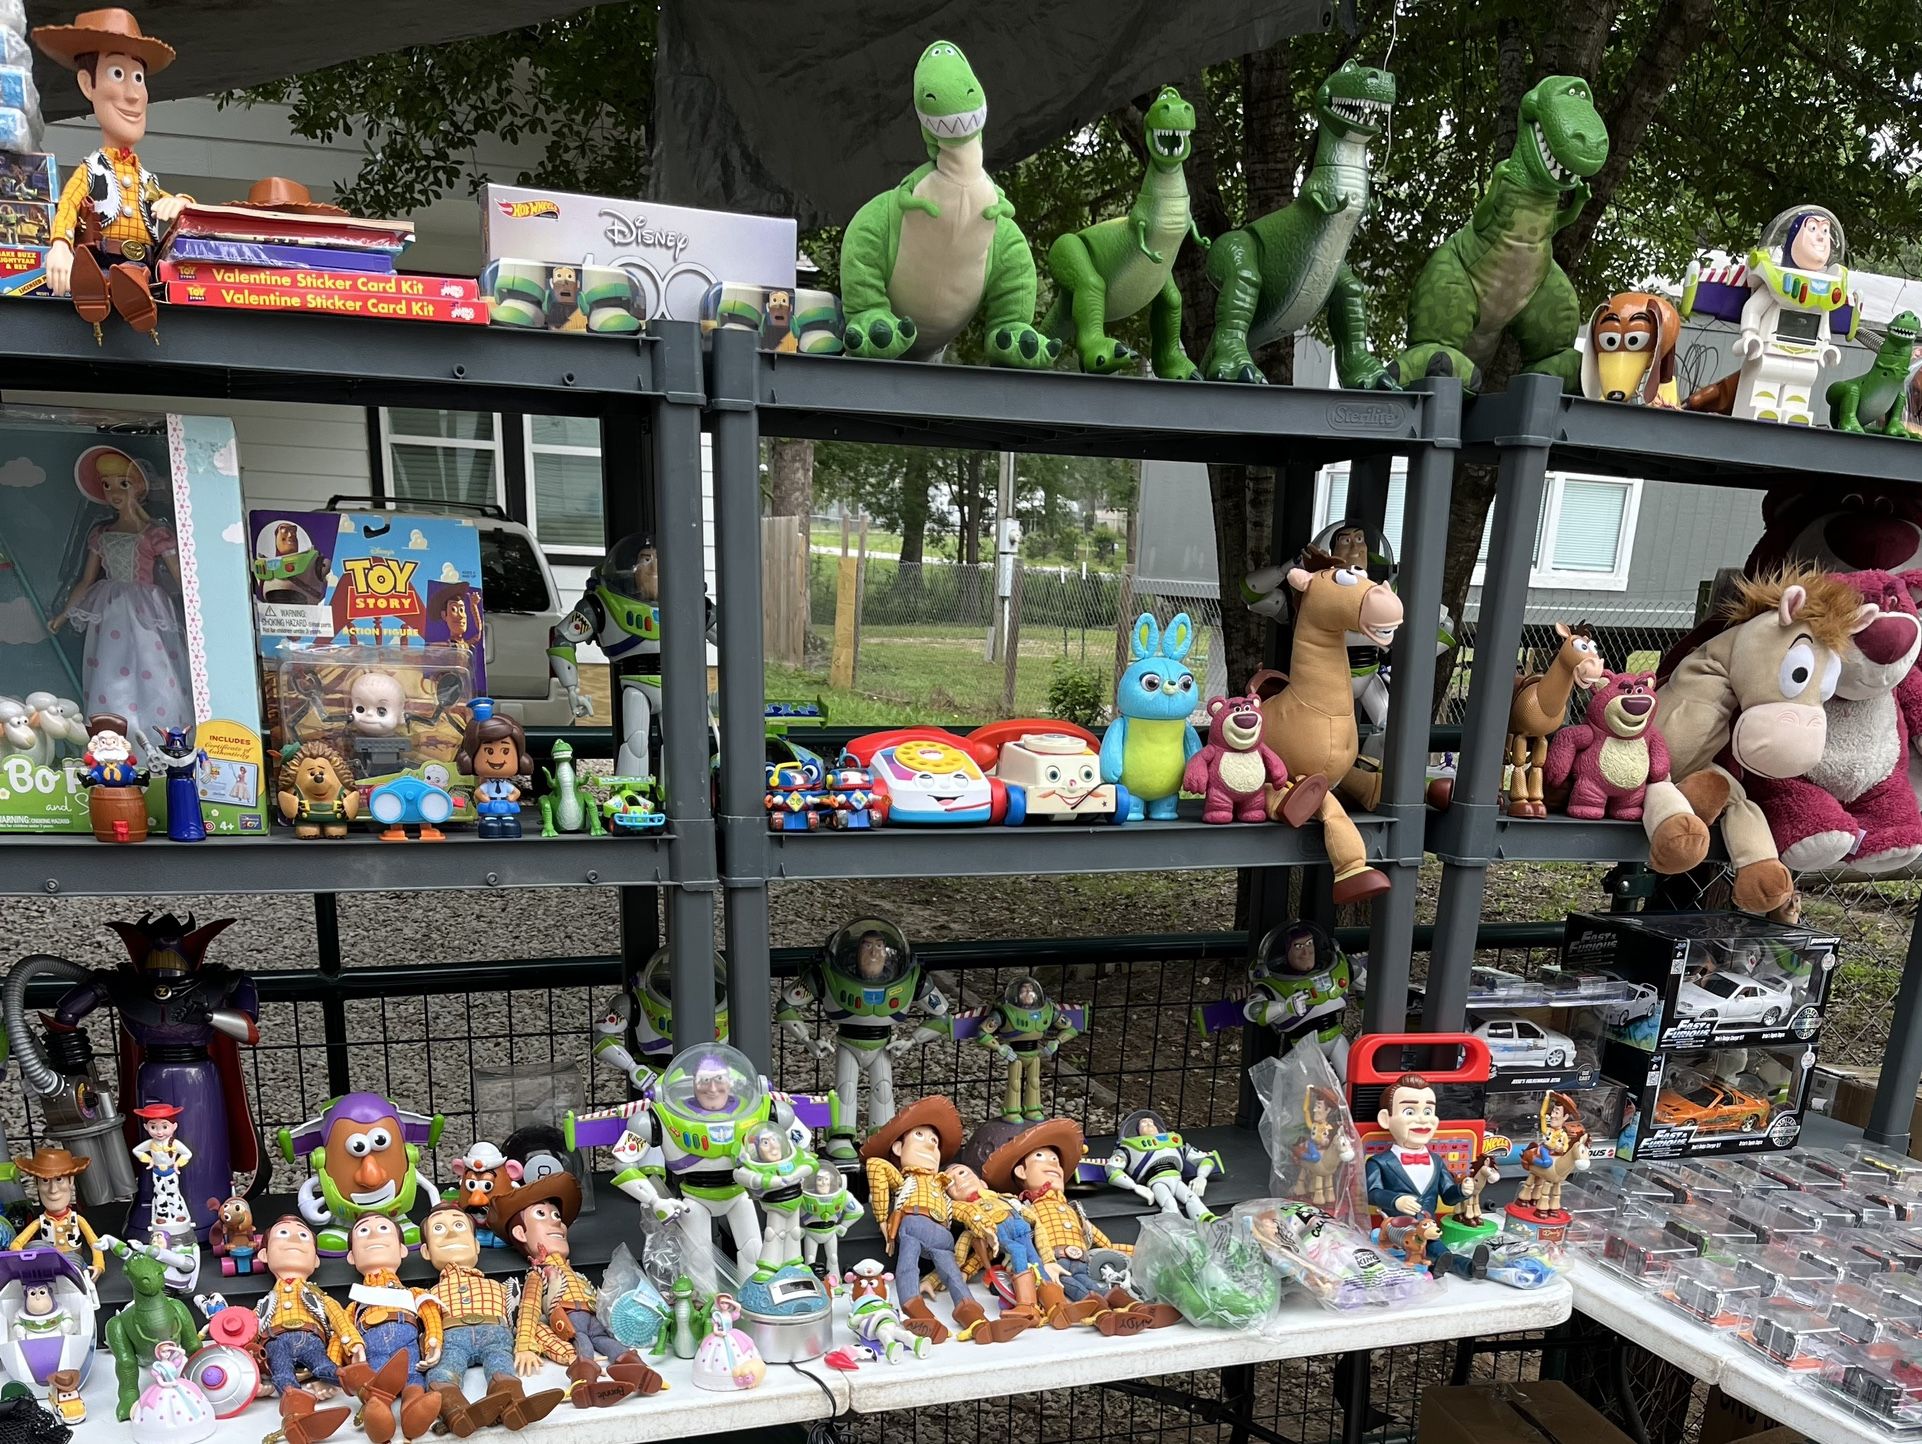 Toys For Sale 